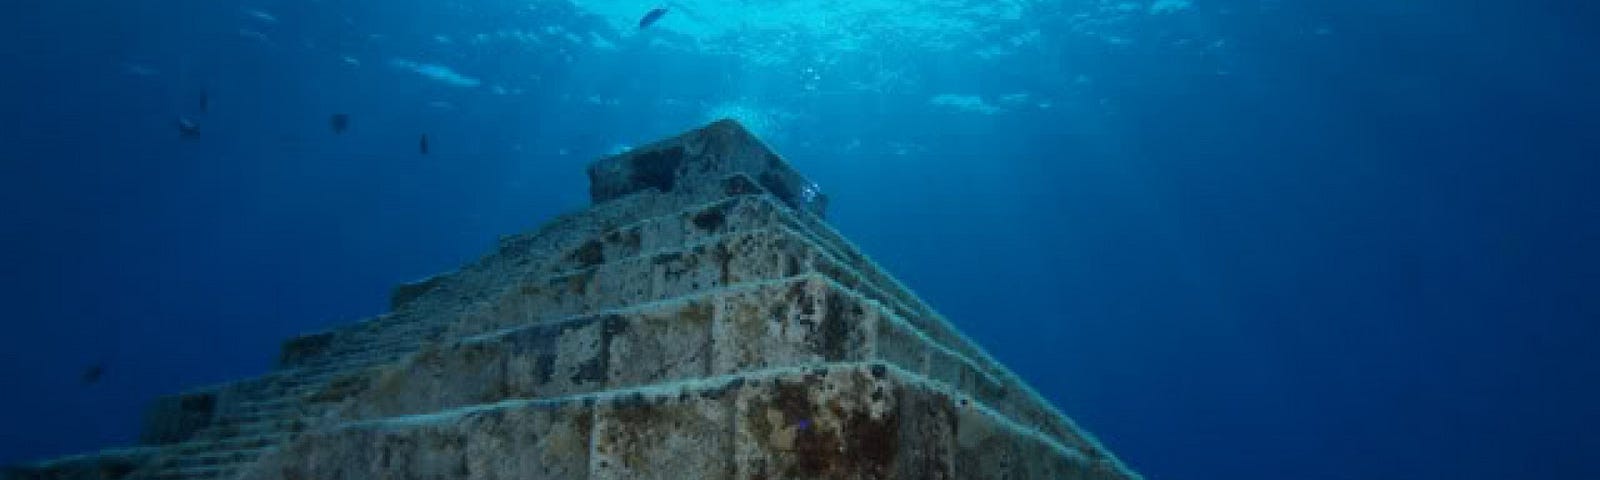 The Yonaguni Monument: Man-Made Monolith or Natural Formation? The mystery of the underwater rock formations near Japan